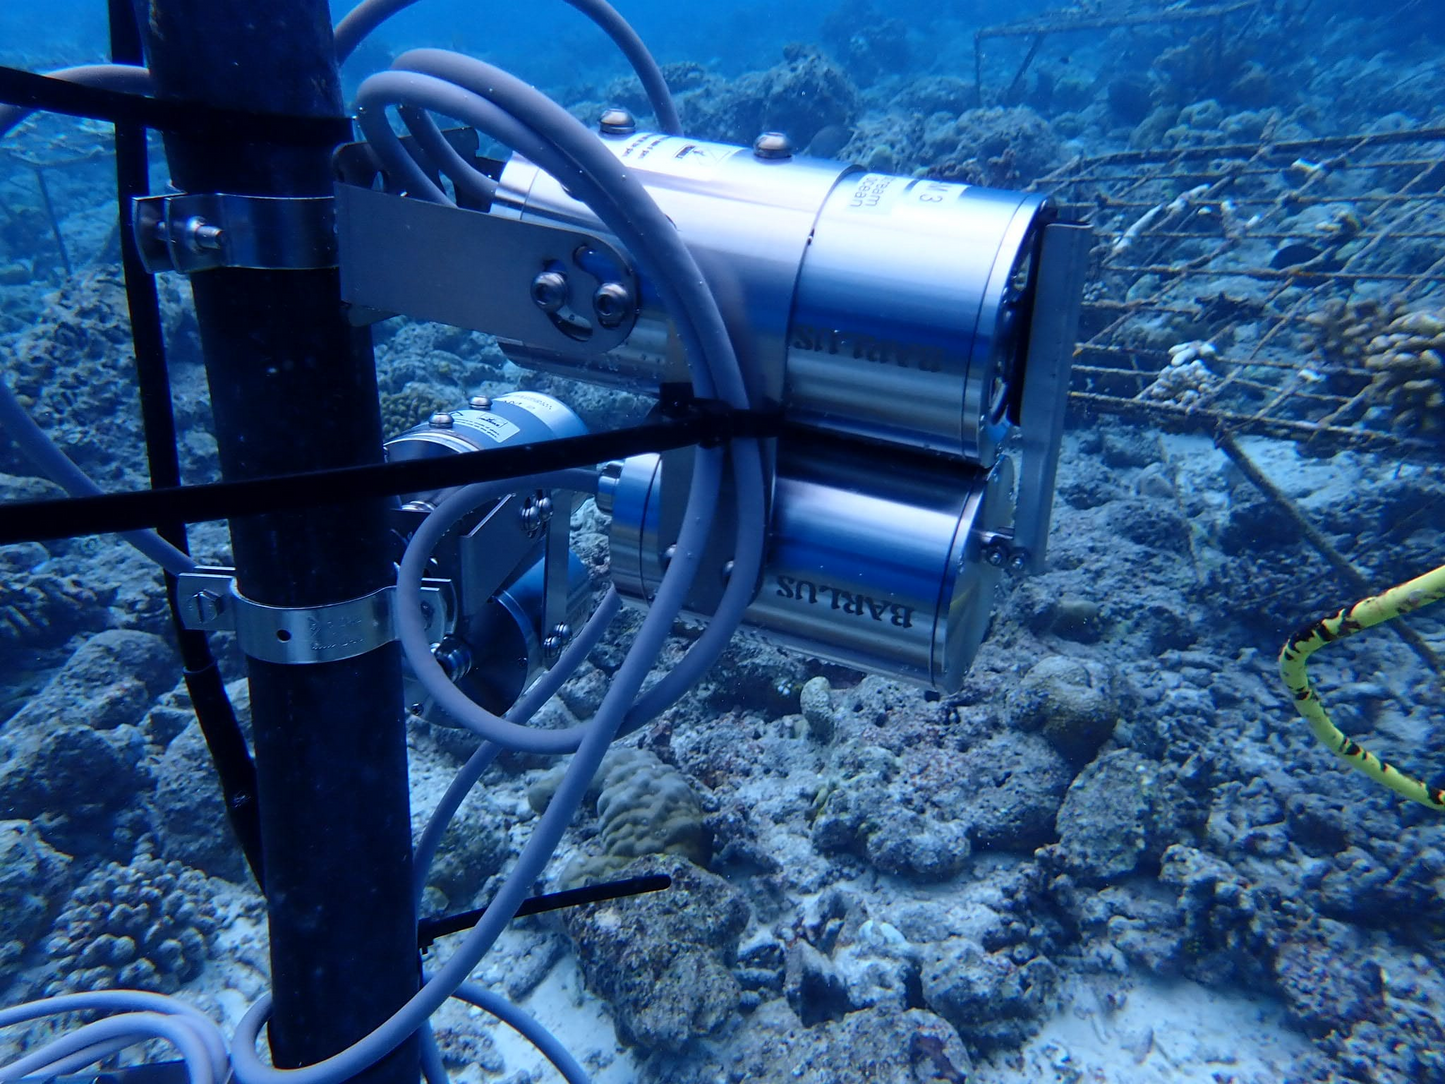 Underwater camera with automatic glass cleaning function